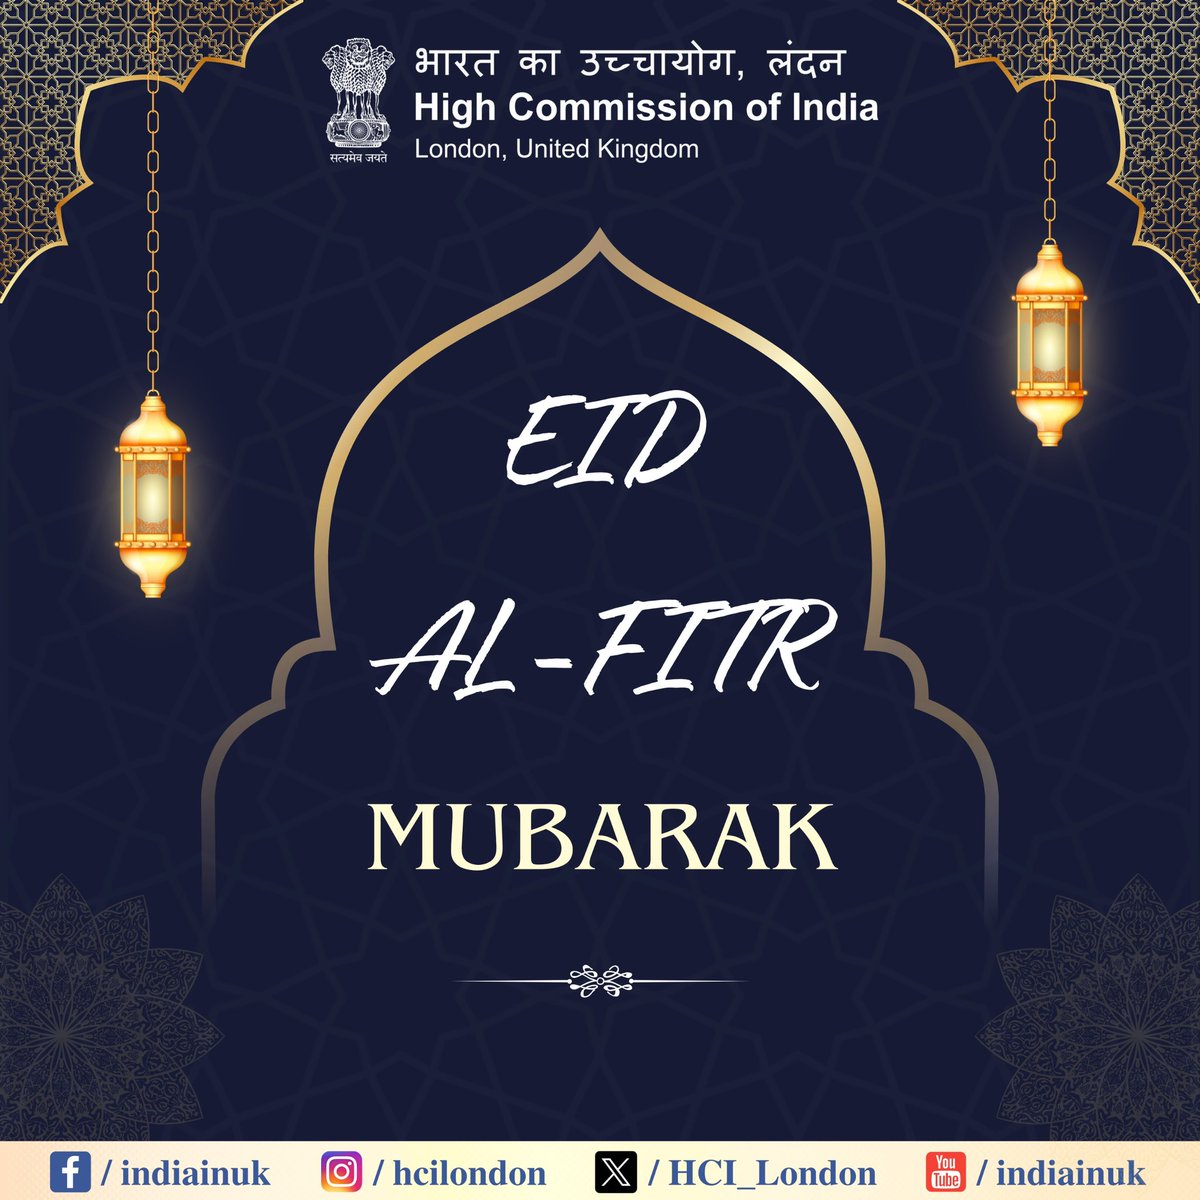 Eid Mubarak to all ! May this special day bring joy, peace, and blessings to you and your loved ones. #Eidmubarak2024